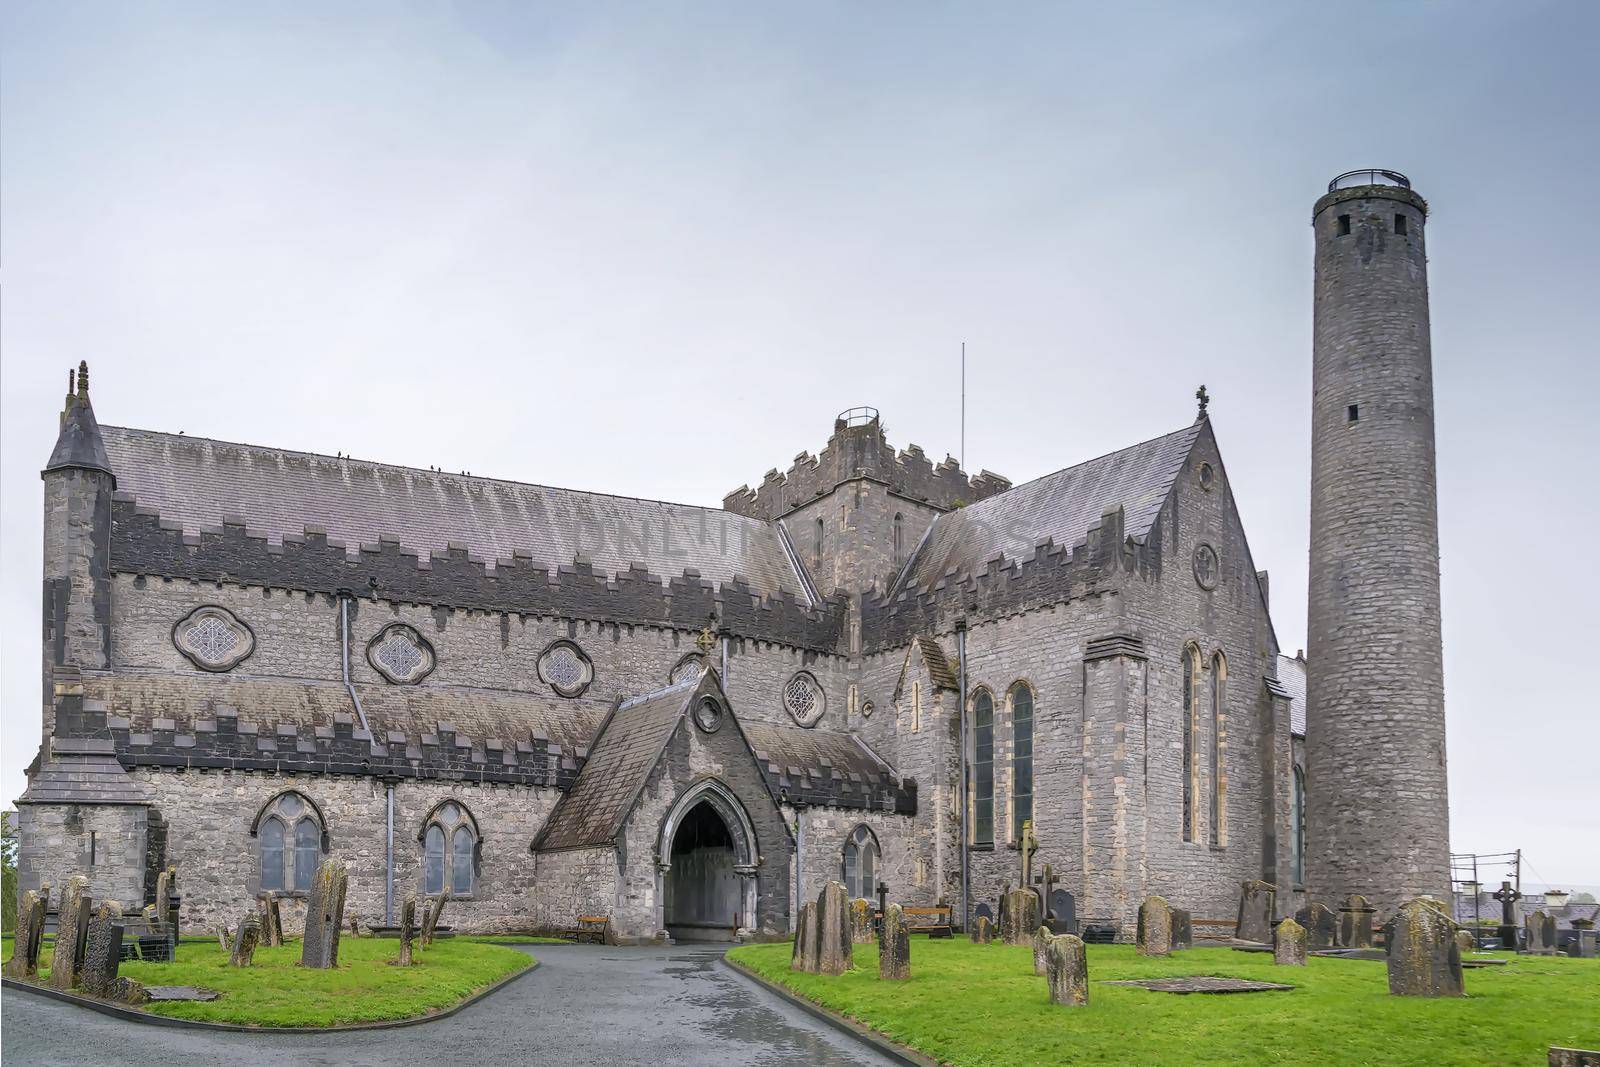 St Canice's Cathedral, also known as Kilkenny Cathedral, is a cathedral of the Church of Ireland in Kilkenny city, Ireland.